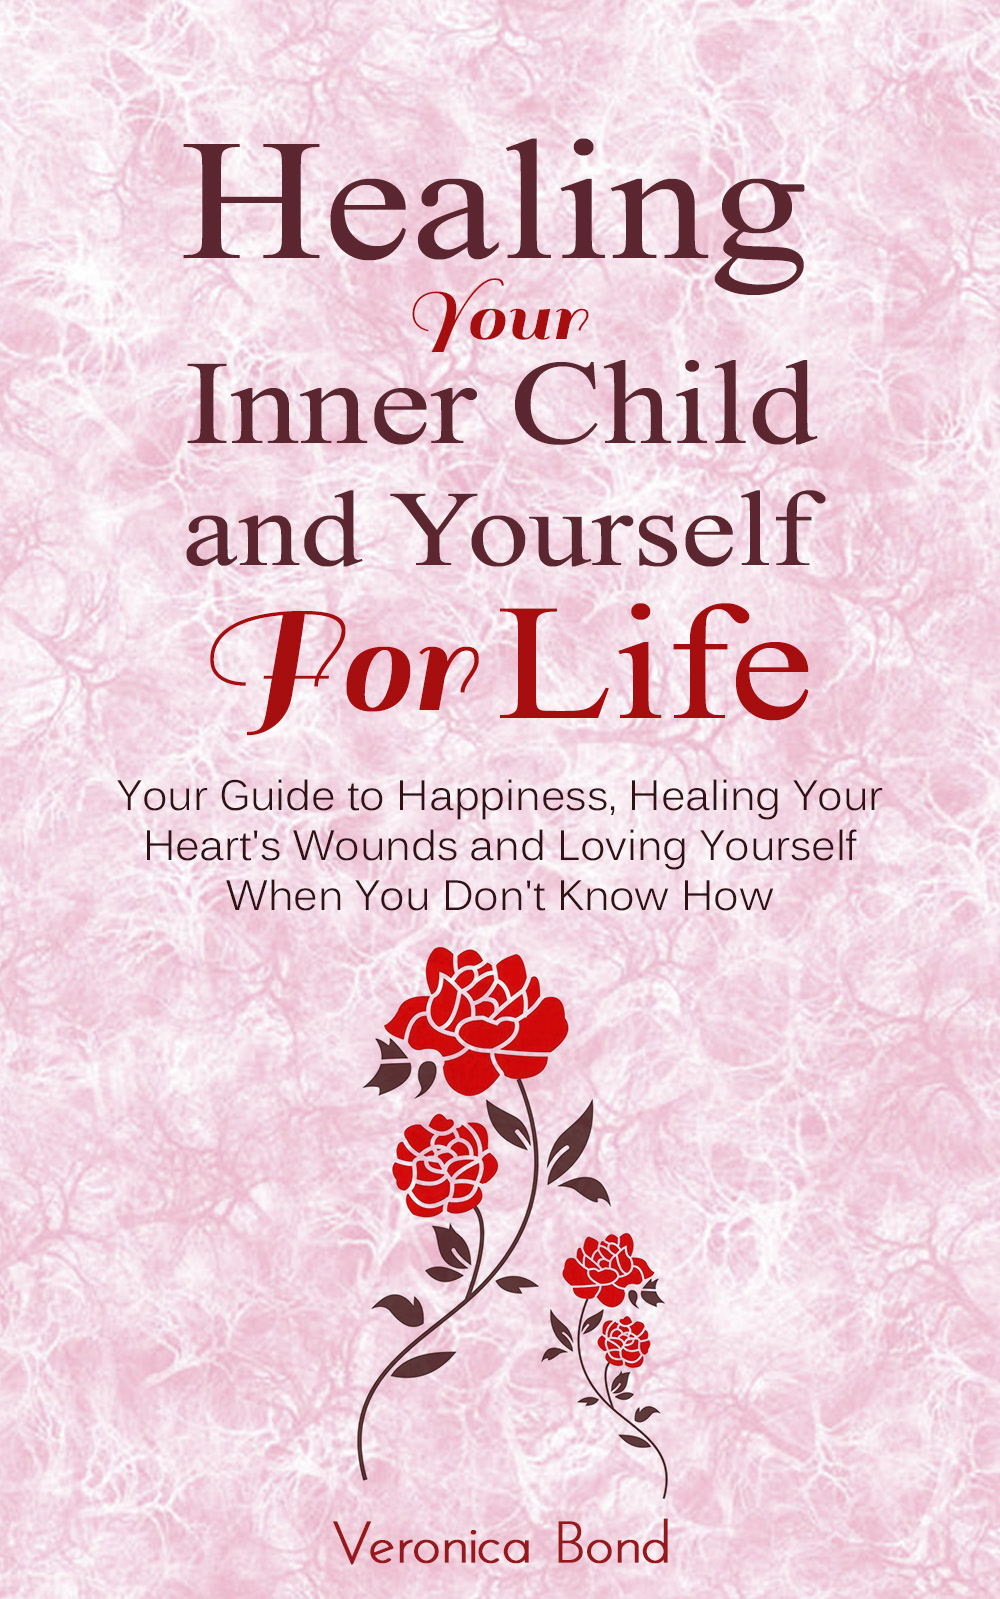 Healing Your Inner Child and Yourself For Life by Veronica Bond